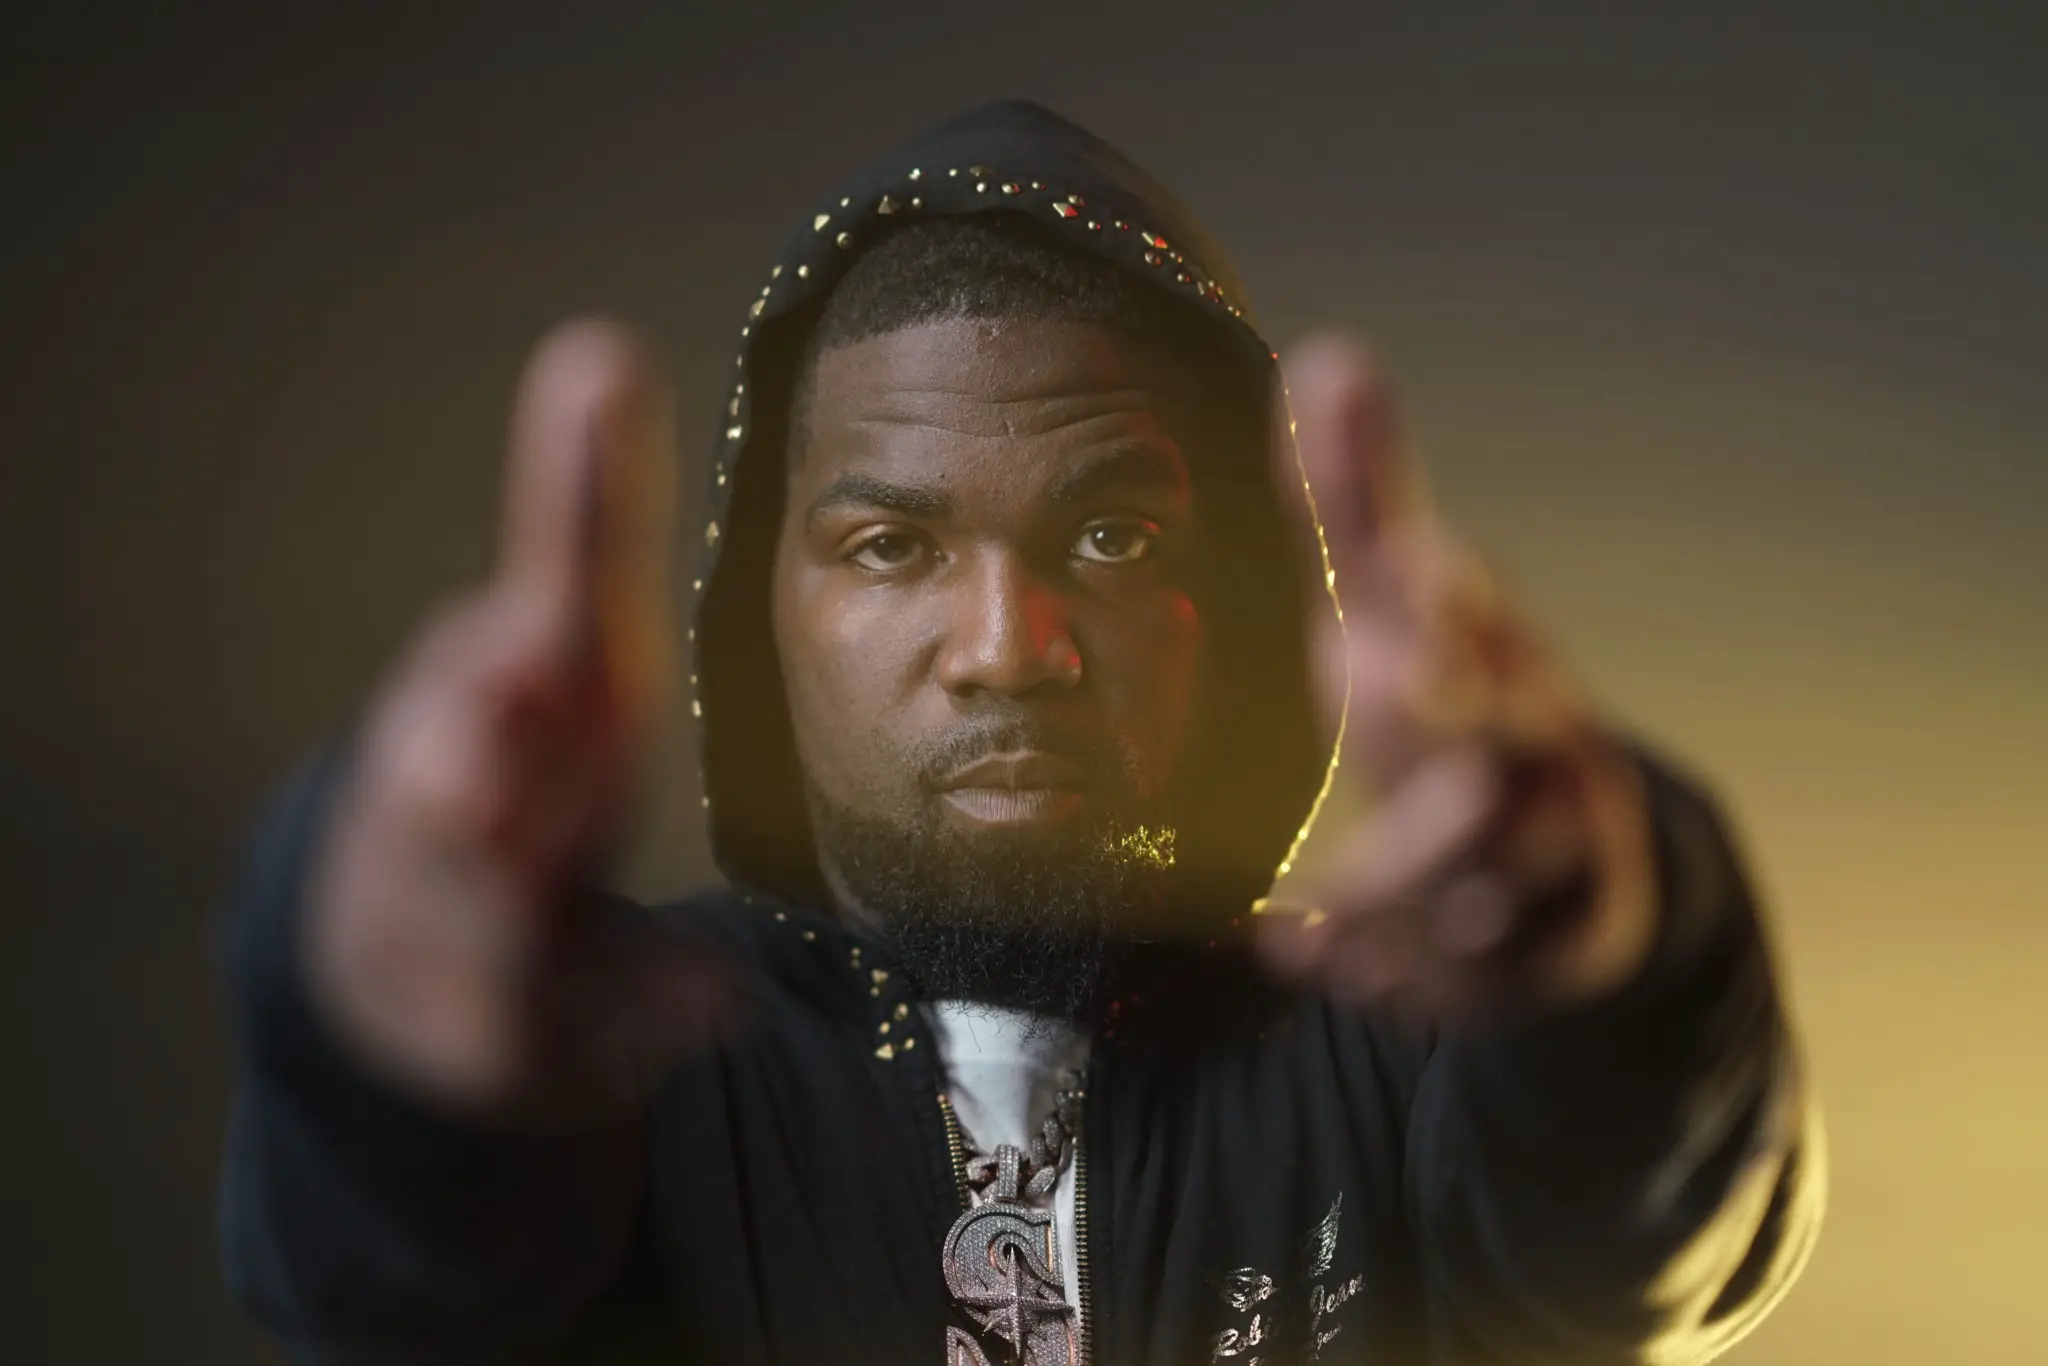 Tsu Surf Pleads Guilty to RICO Conspiracy